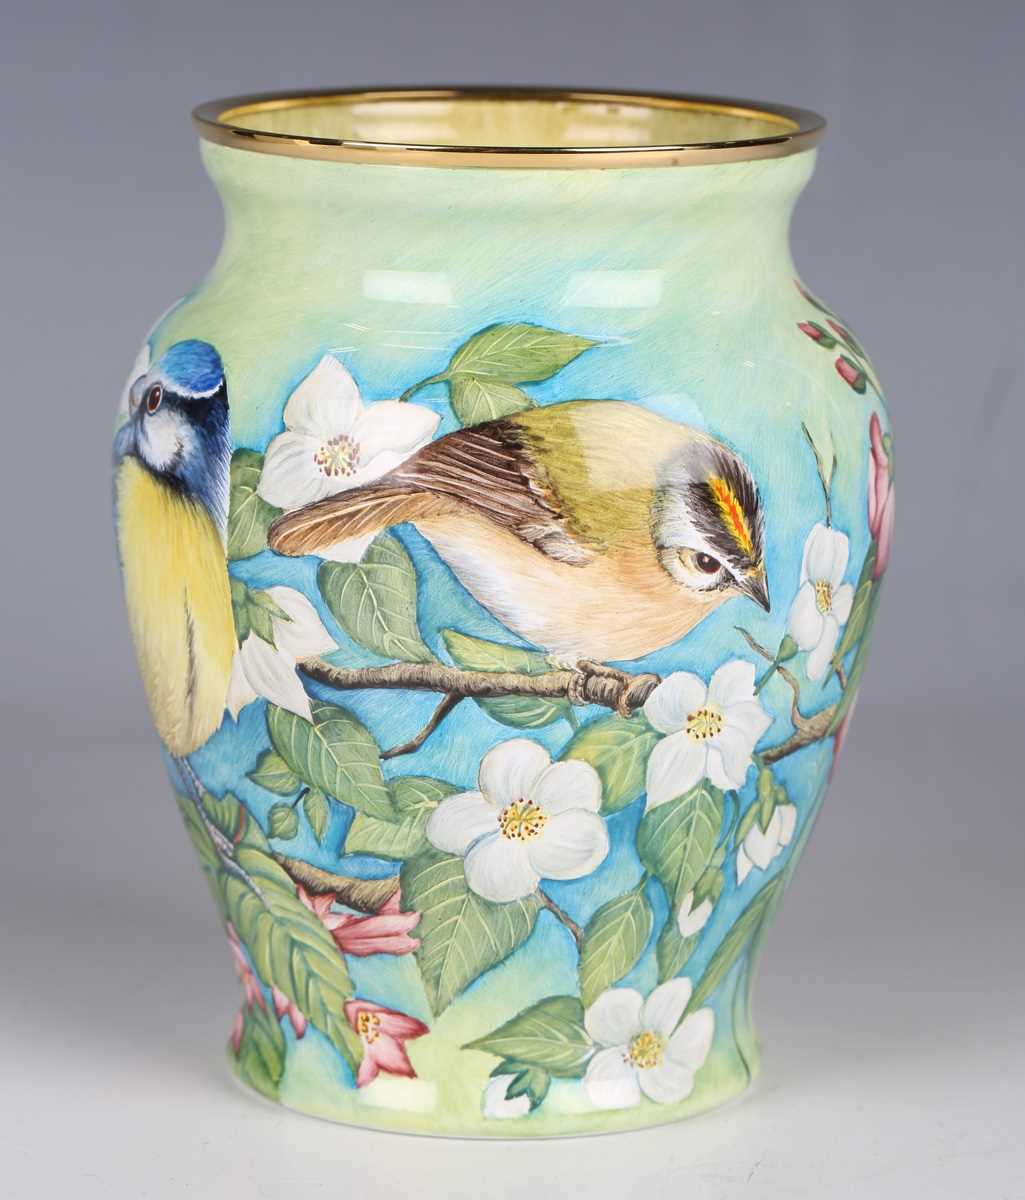 A limited edition Elliot Hall Enamels Prestige Ombersley vase, circa 2007, painted by the - Image 7 of 28